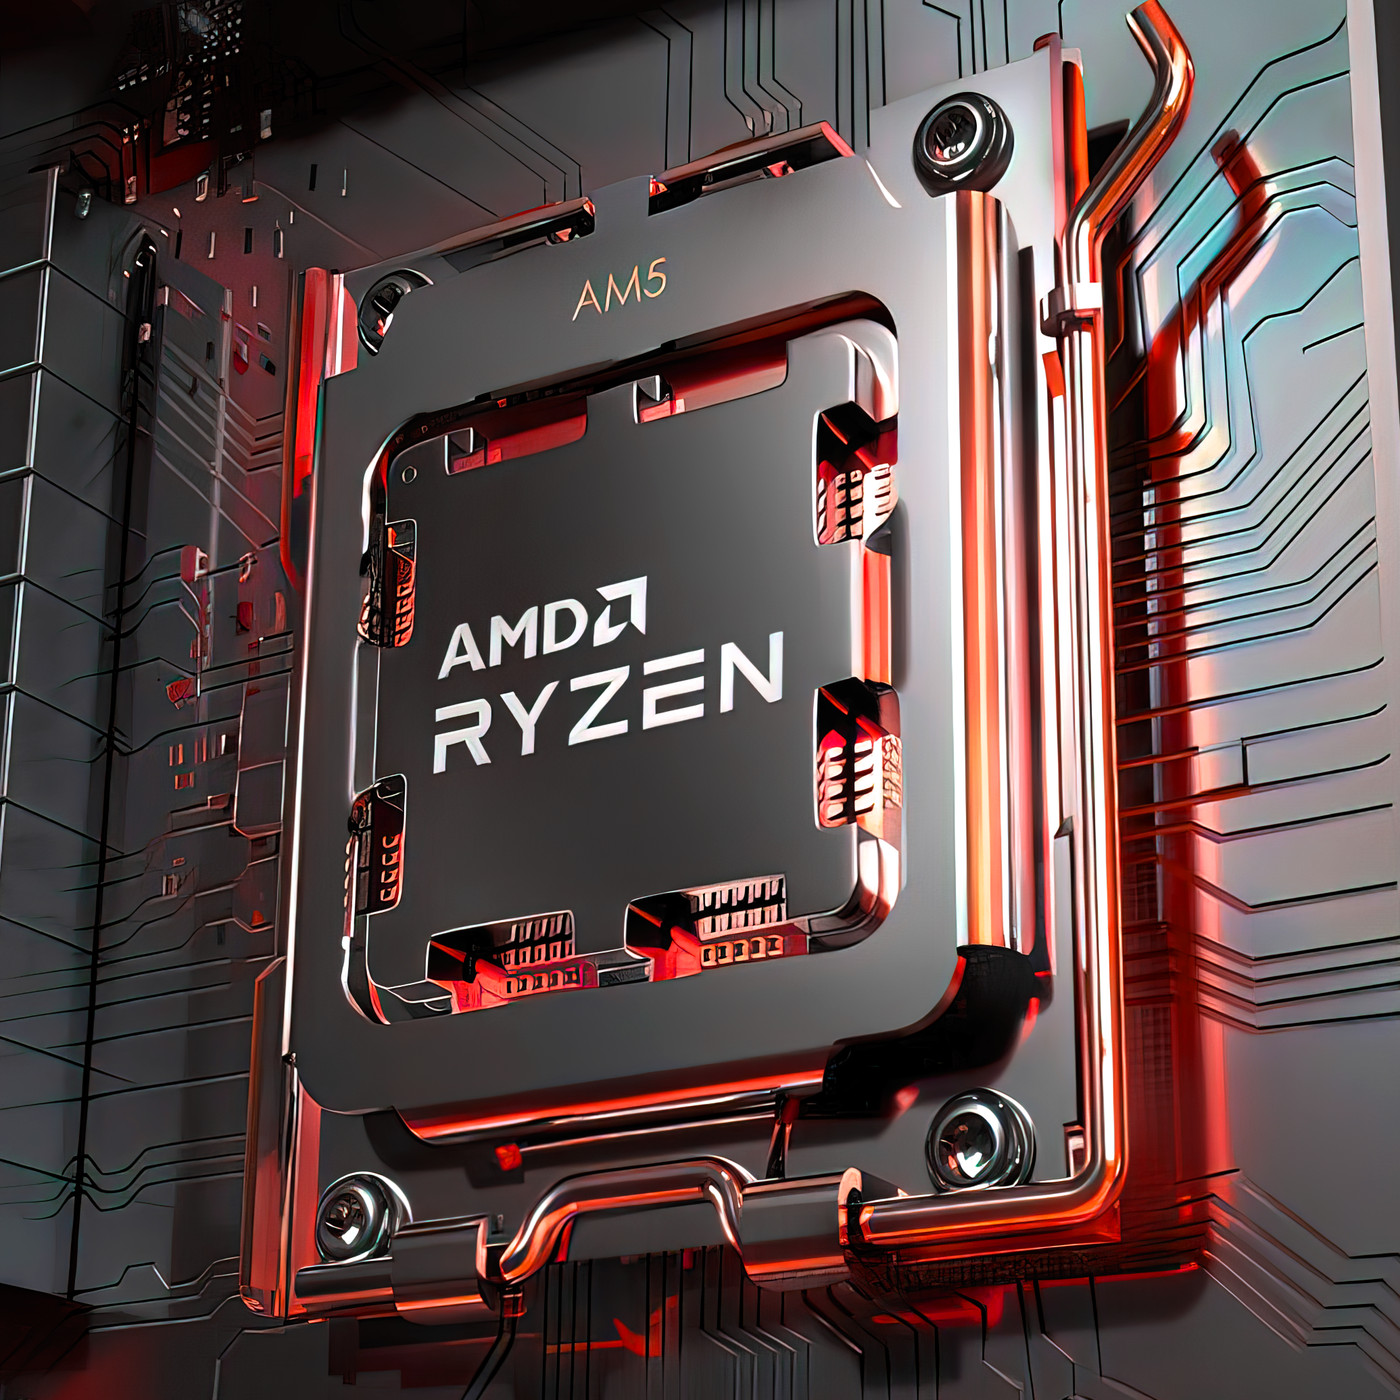 Gepland pijp Marine AMD Ryzen 9 7900X review: AMD is back to beat Intel's 12900K - The Verge